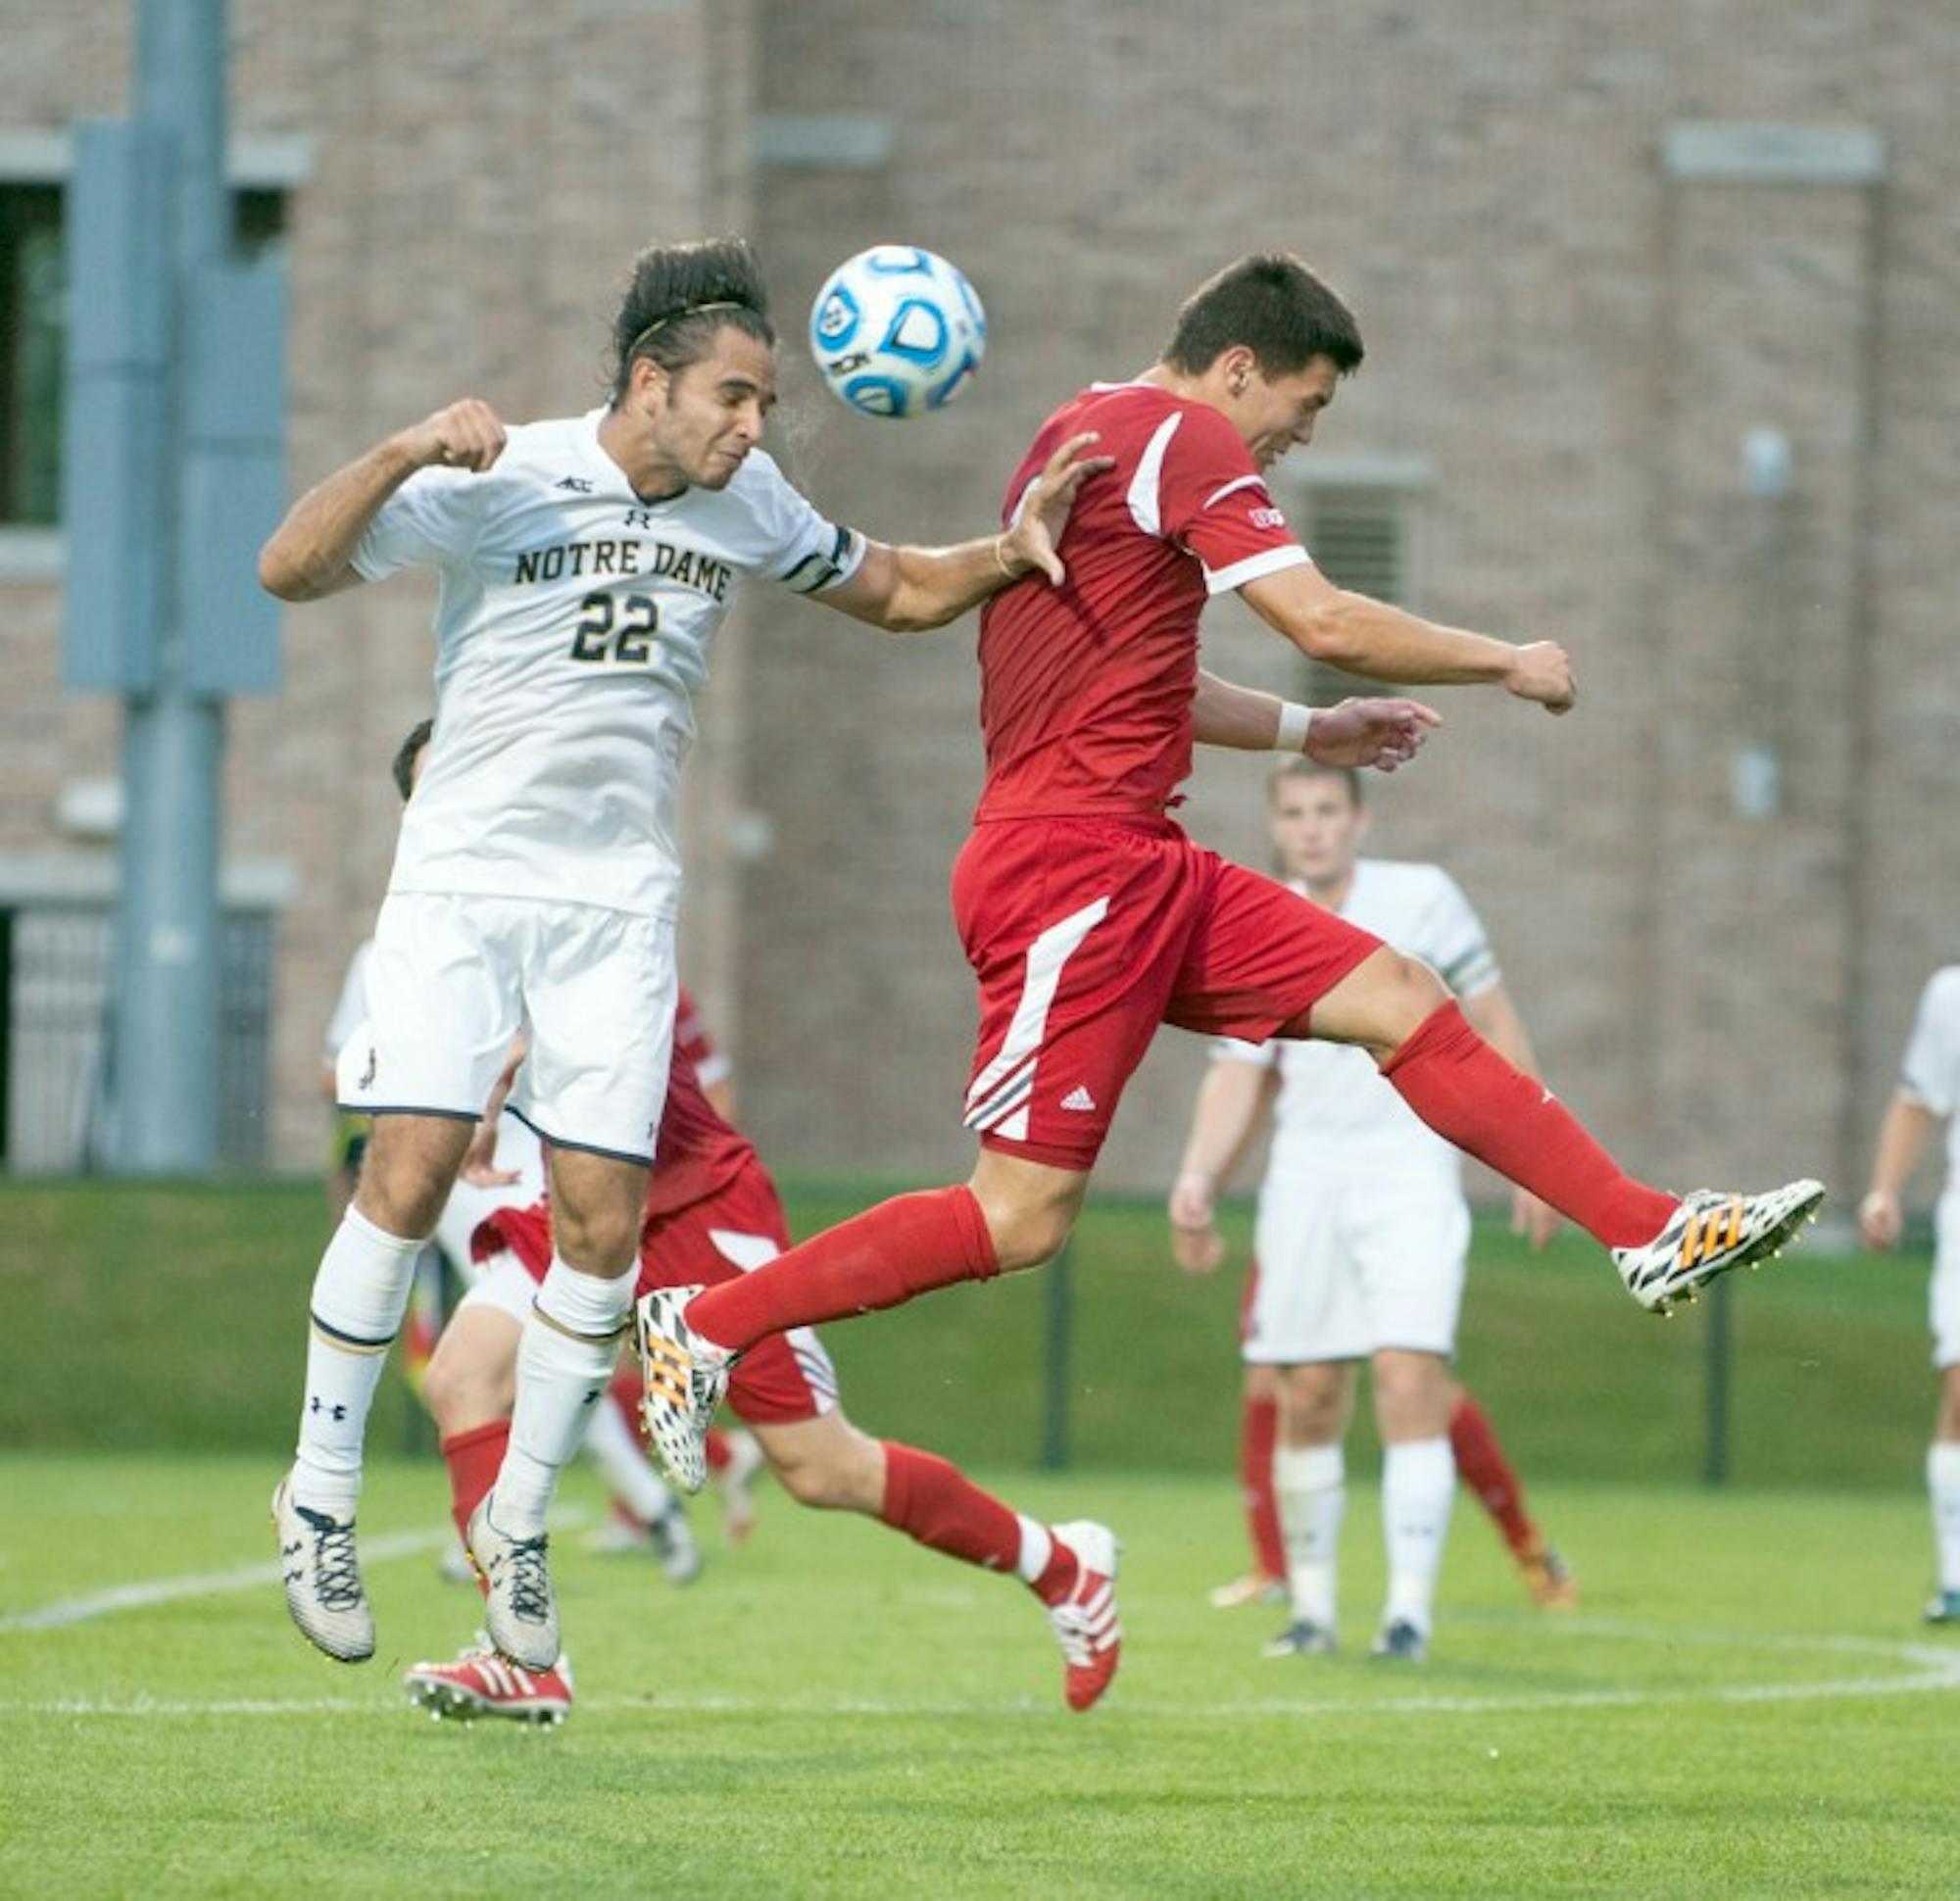 Irish senior defender Luke Mishu elevates over a Badger forward to head the ball in No. 1 Notre Dame’s 5-1 win against No. 21 Wisconsin on Monday at Alumni Stadium. Mishu played 59 minutes in the team’s final exhibition match of the season.